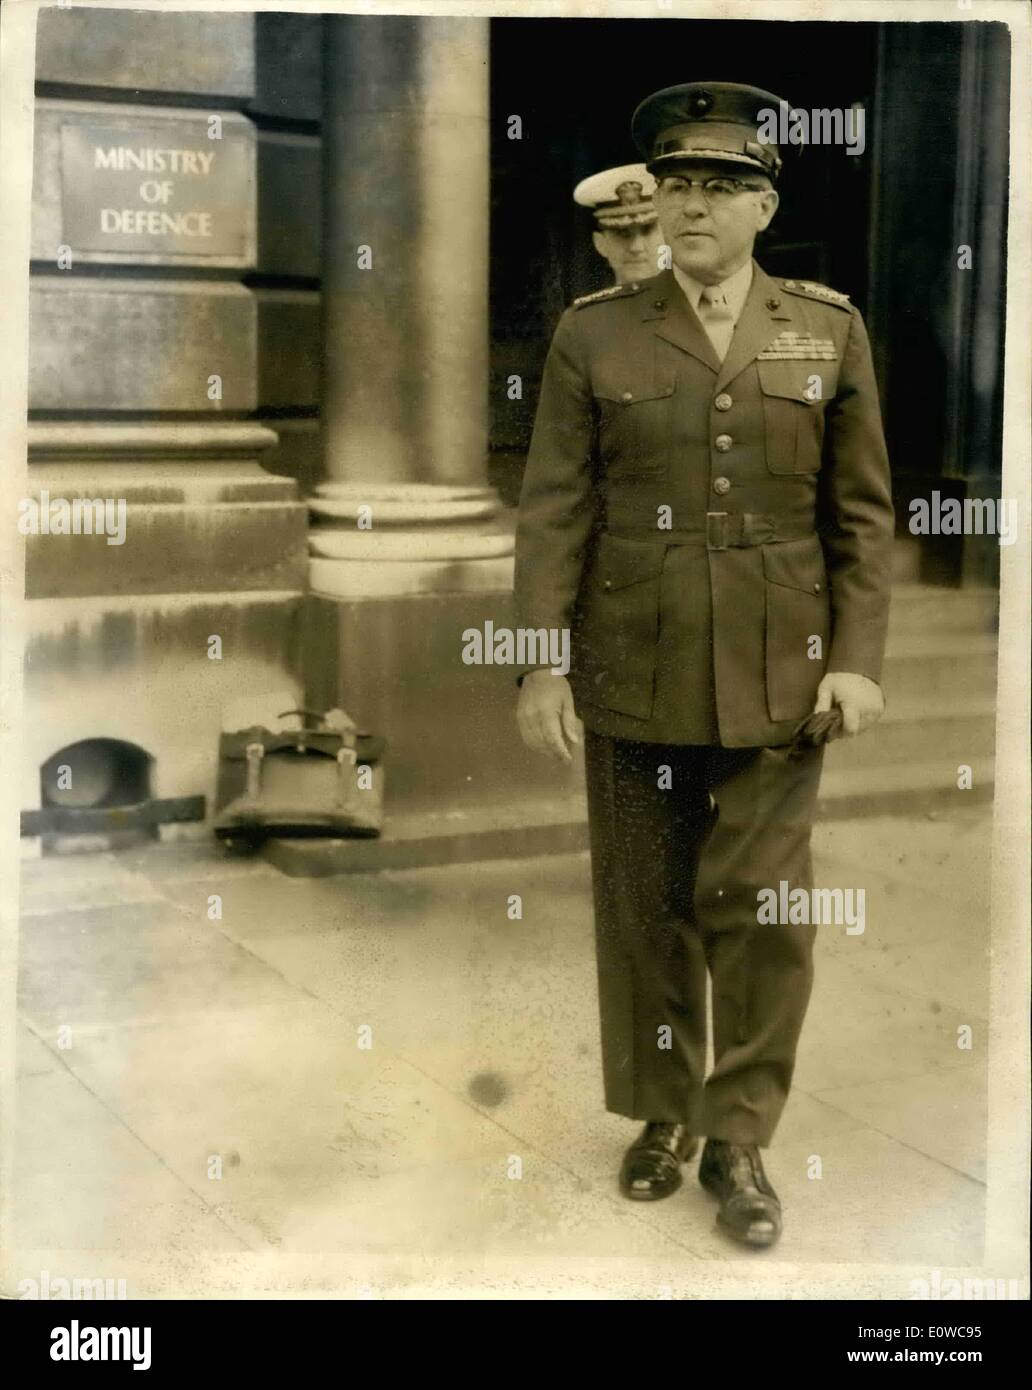 May 05, 1962 - Us marine corps commandant meets minister of defense: general David M. Shoup, commandant of the united states marine corps, who is currently visiting Britain. This afternoon called on Harold Watkinson, the minister of Defence, at the ministry. Photo shows General leaving the ministry after his visit this afternoon. Stock Photo